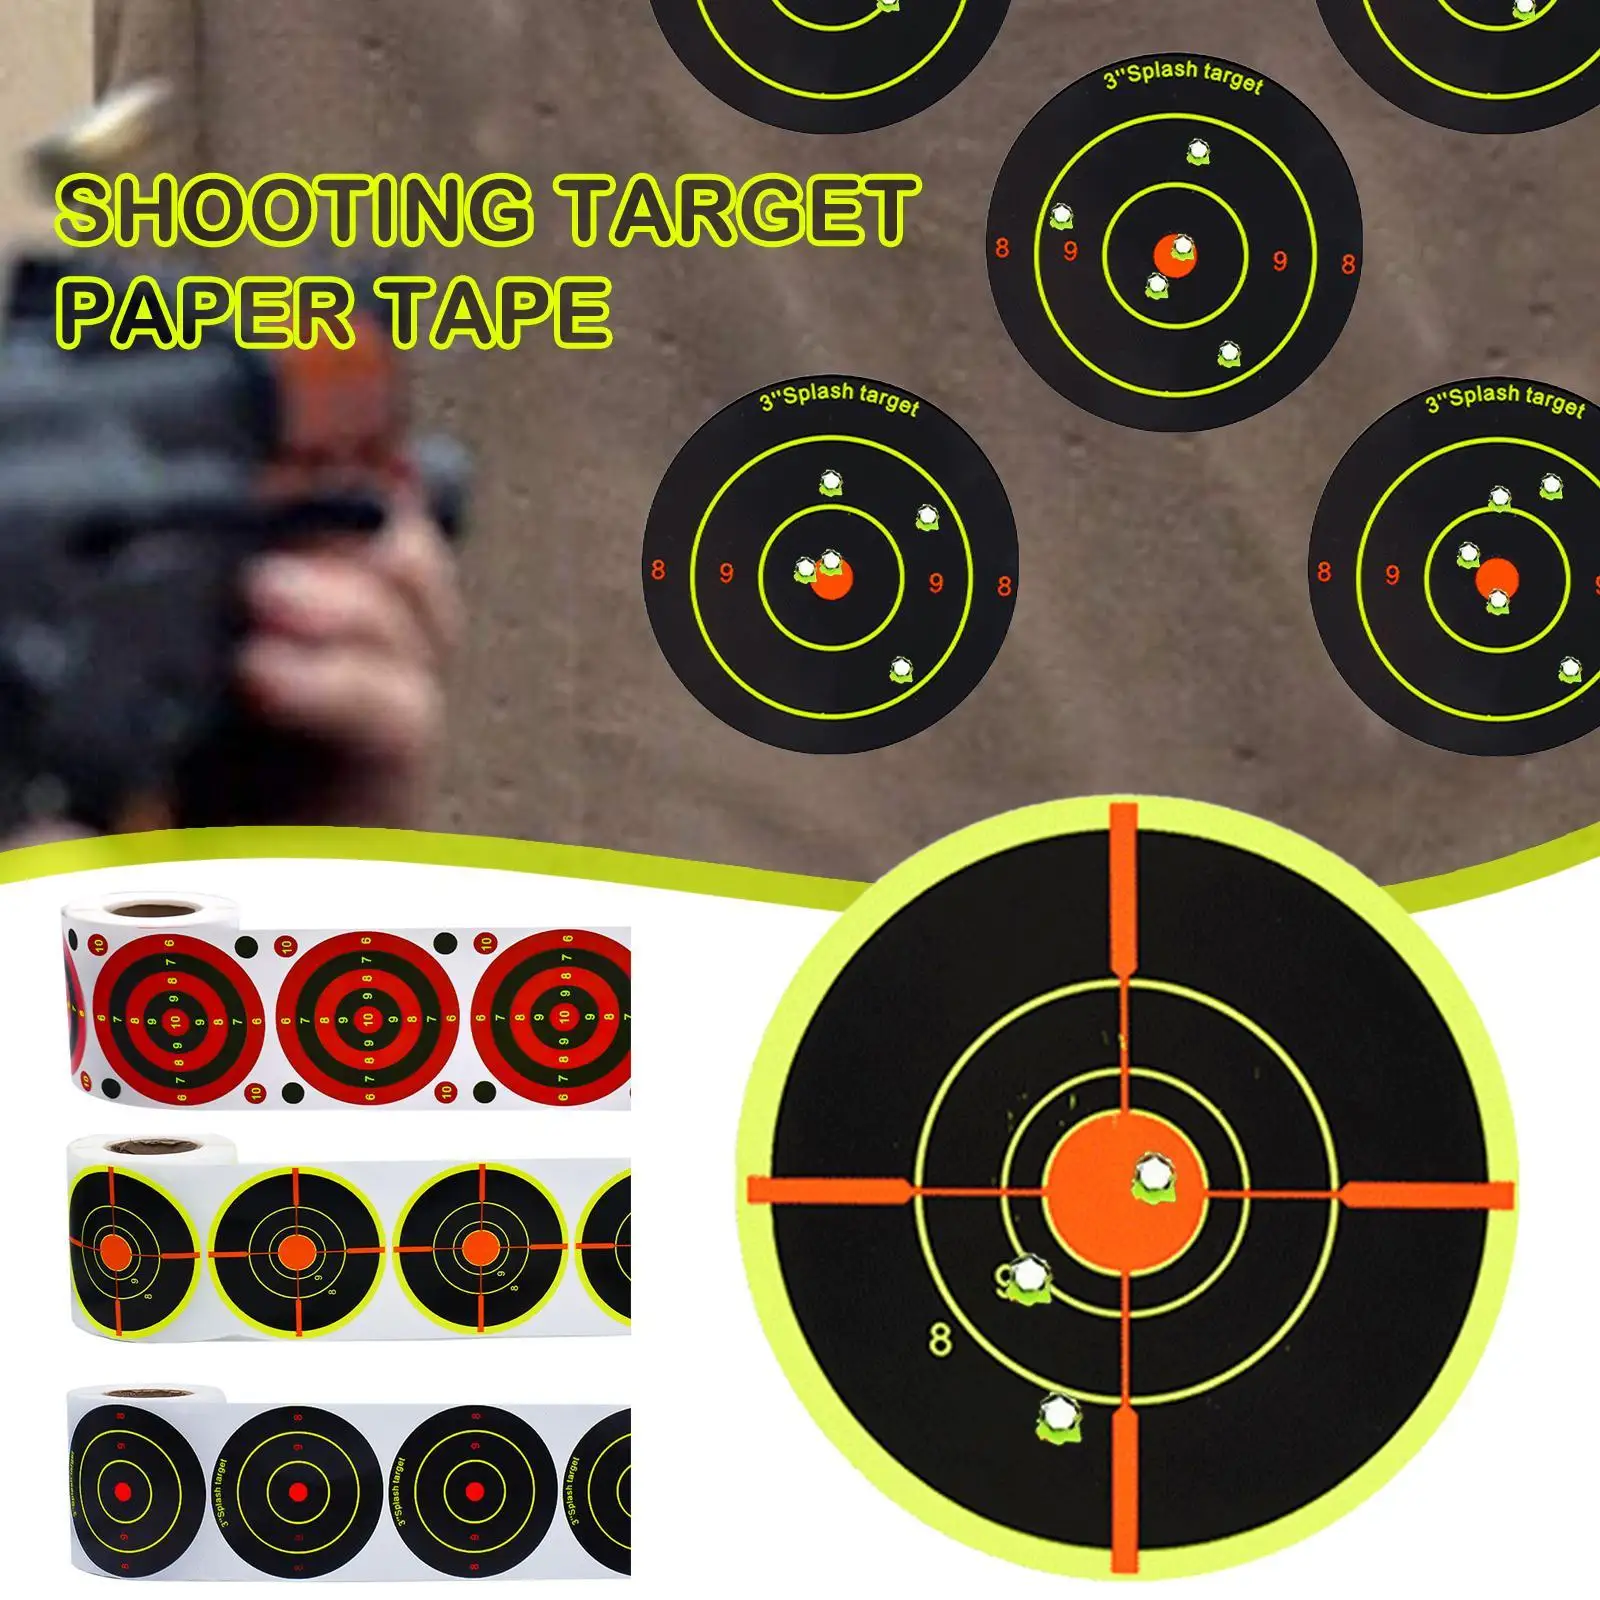 

Shooting Target Adhesive 200pcs/Roll Shoot Targets Splatter Reactive Stickers for Archery Bow Hunting Practice Training Targets